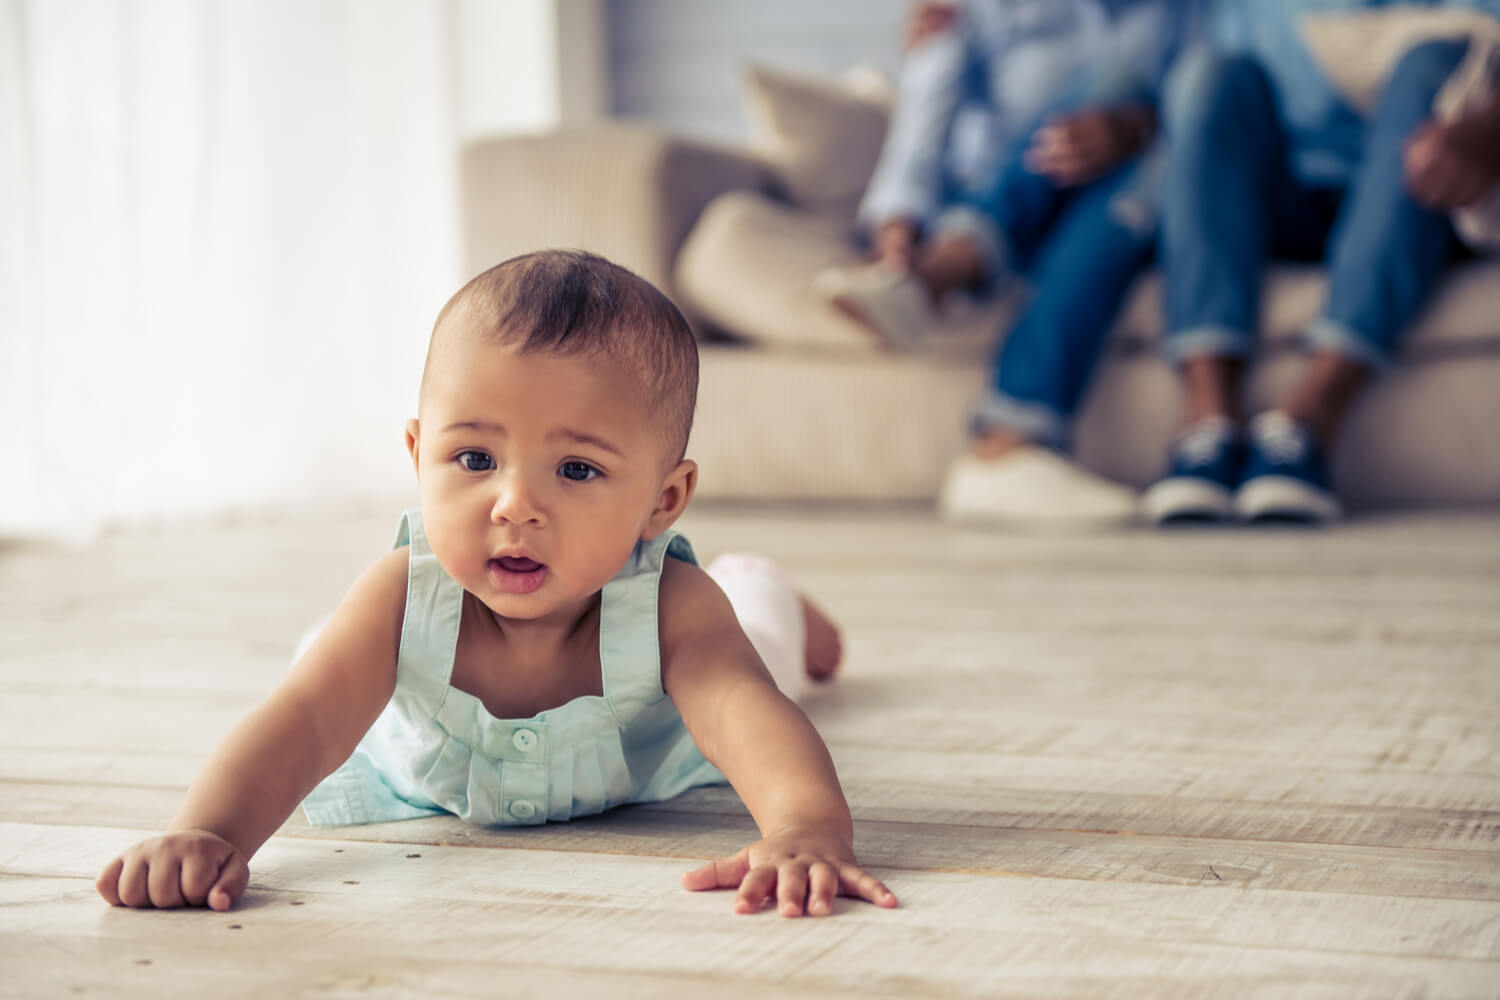 Baby is Not Crawling – Causes and Ways to Deal With it